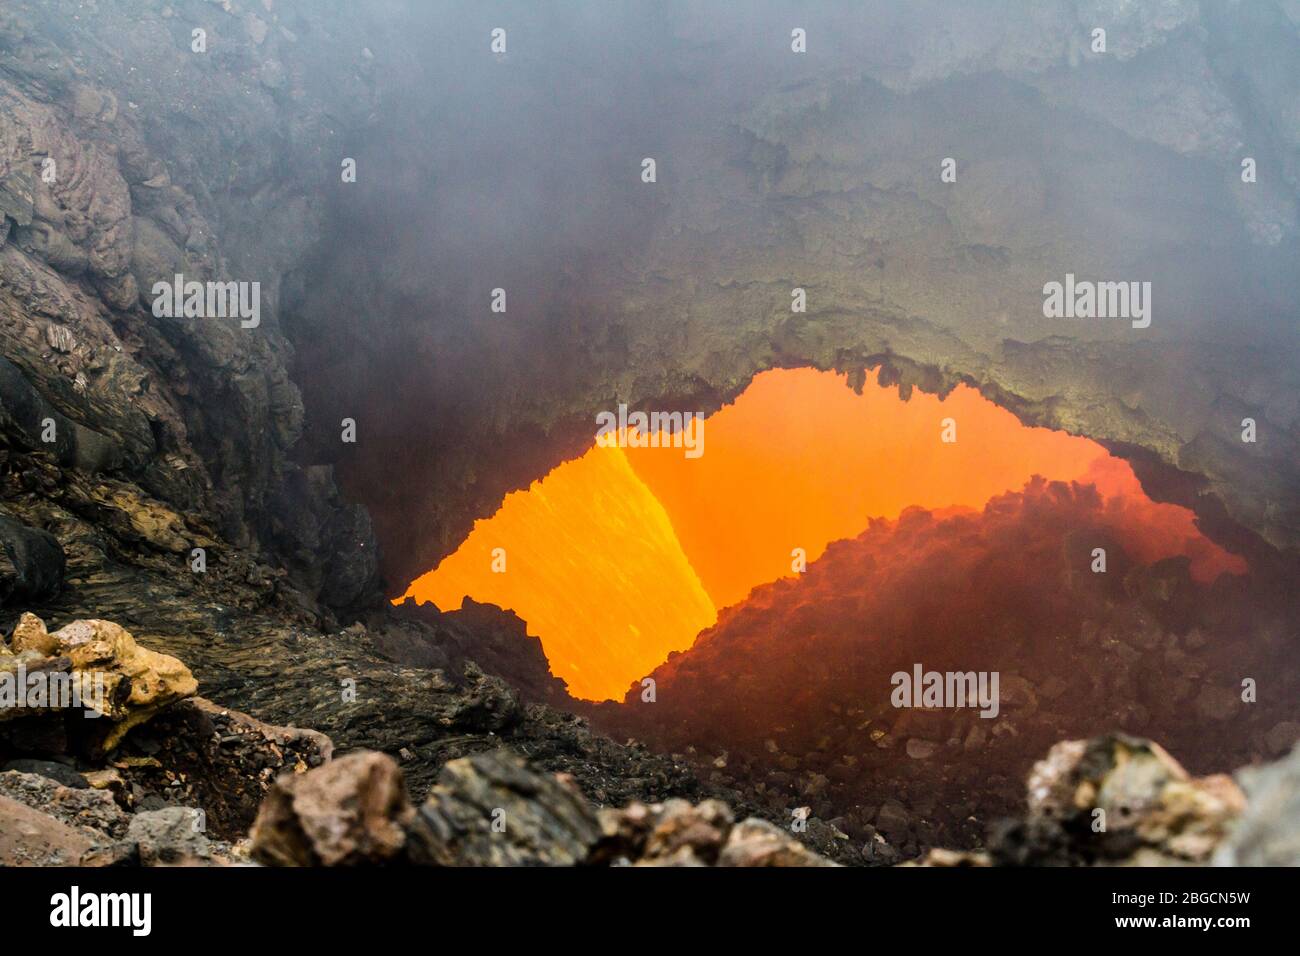 Eruption of Volcano Tolbachik, boiling magma flowing through lava tubes  under the layer of solid lava, Kamchatka Peninsula, Russia Stock Photo -  Alamy